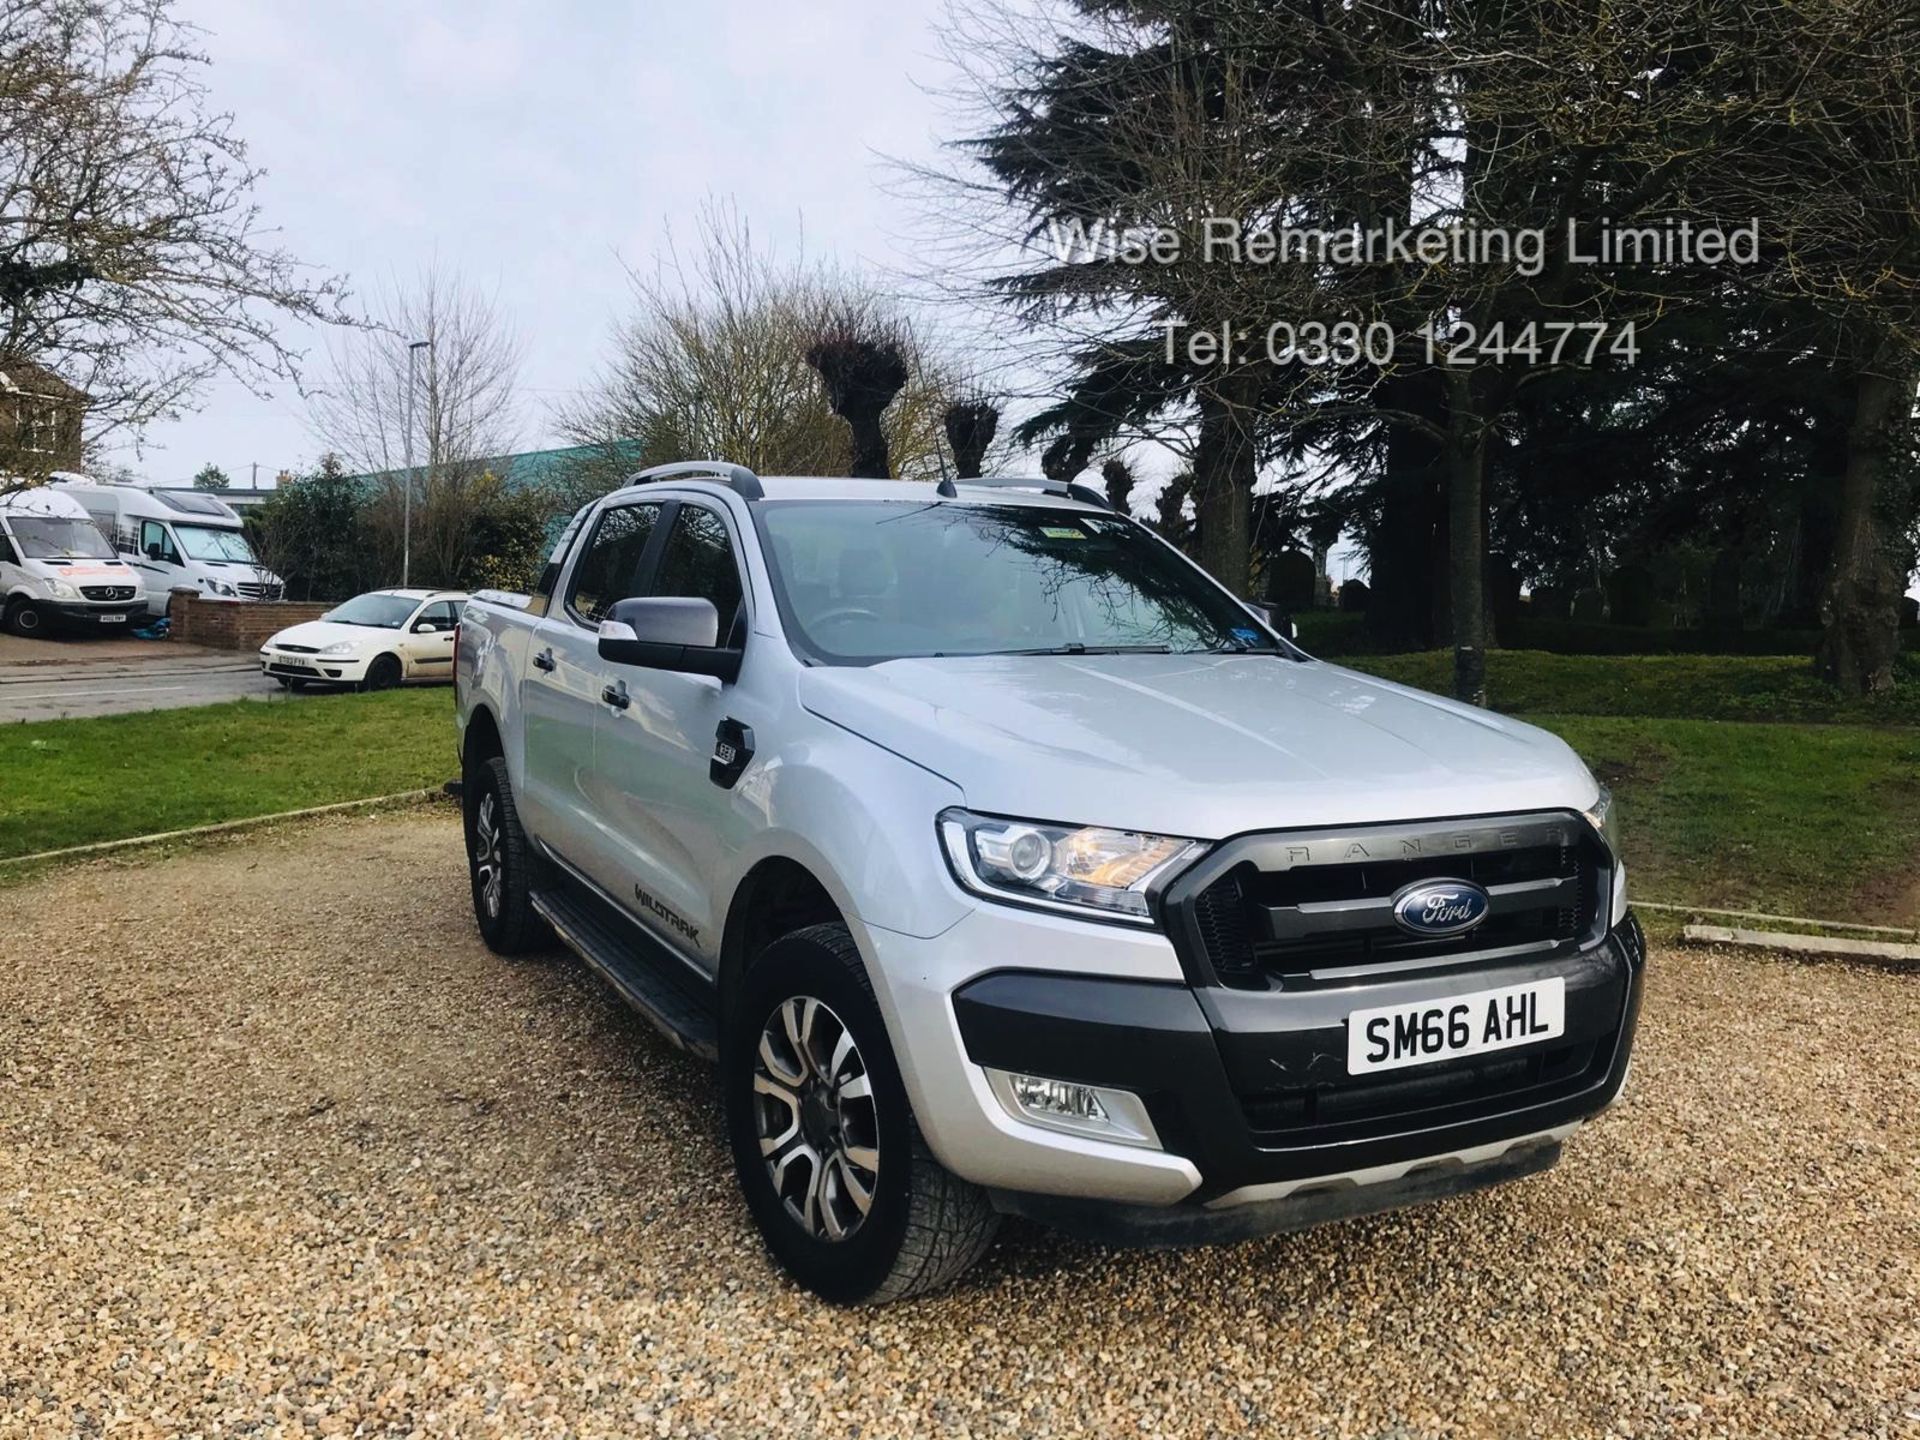 Ford Ranger 3.2 TDCI WILDTRAK - Auto - 2017 Model - 1 Former Keeper - 4x4 - TOP OF THE RANGE - Image 7 of 16